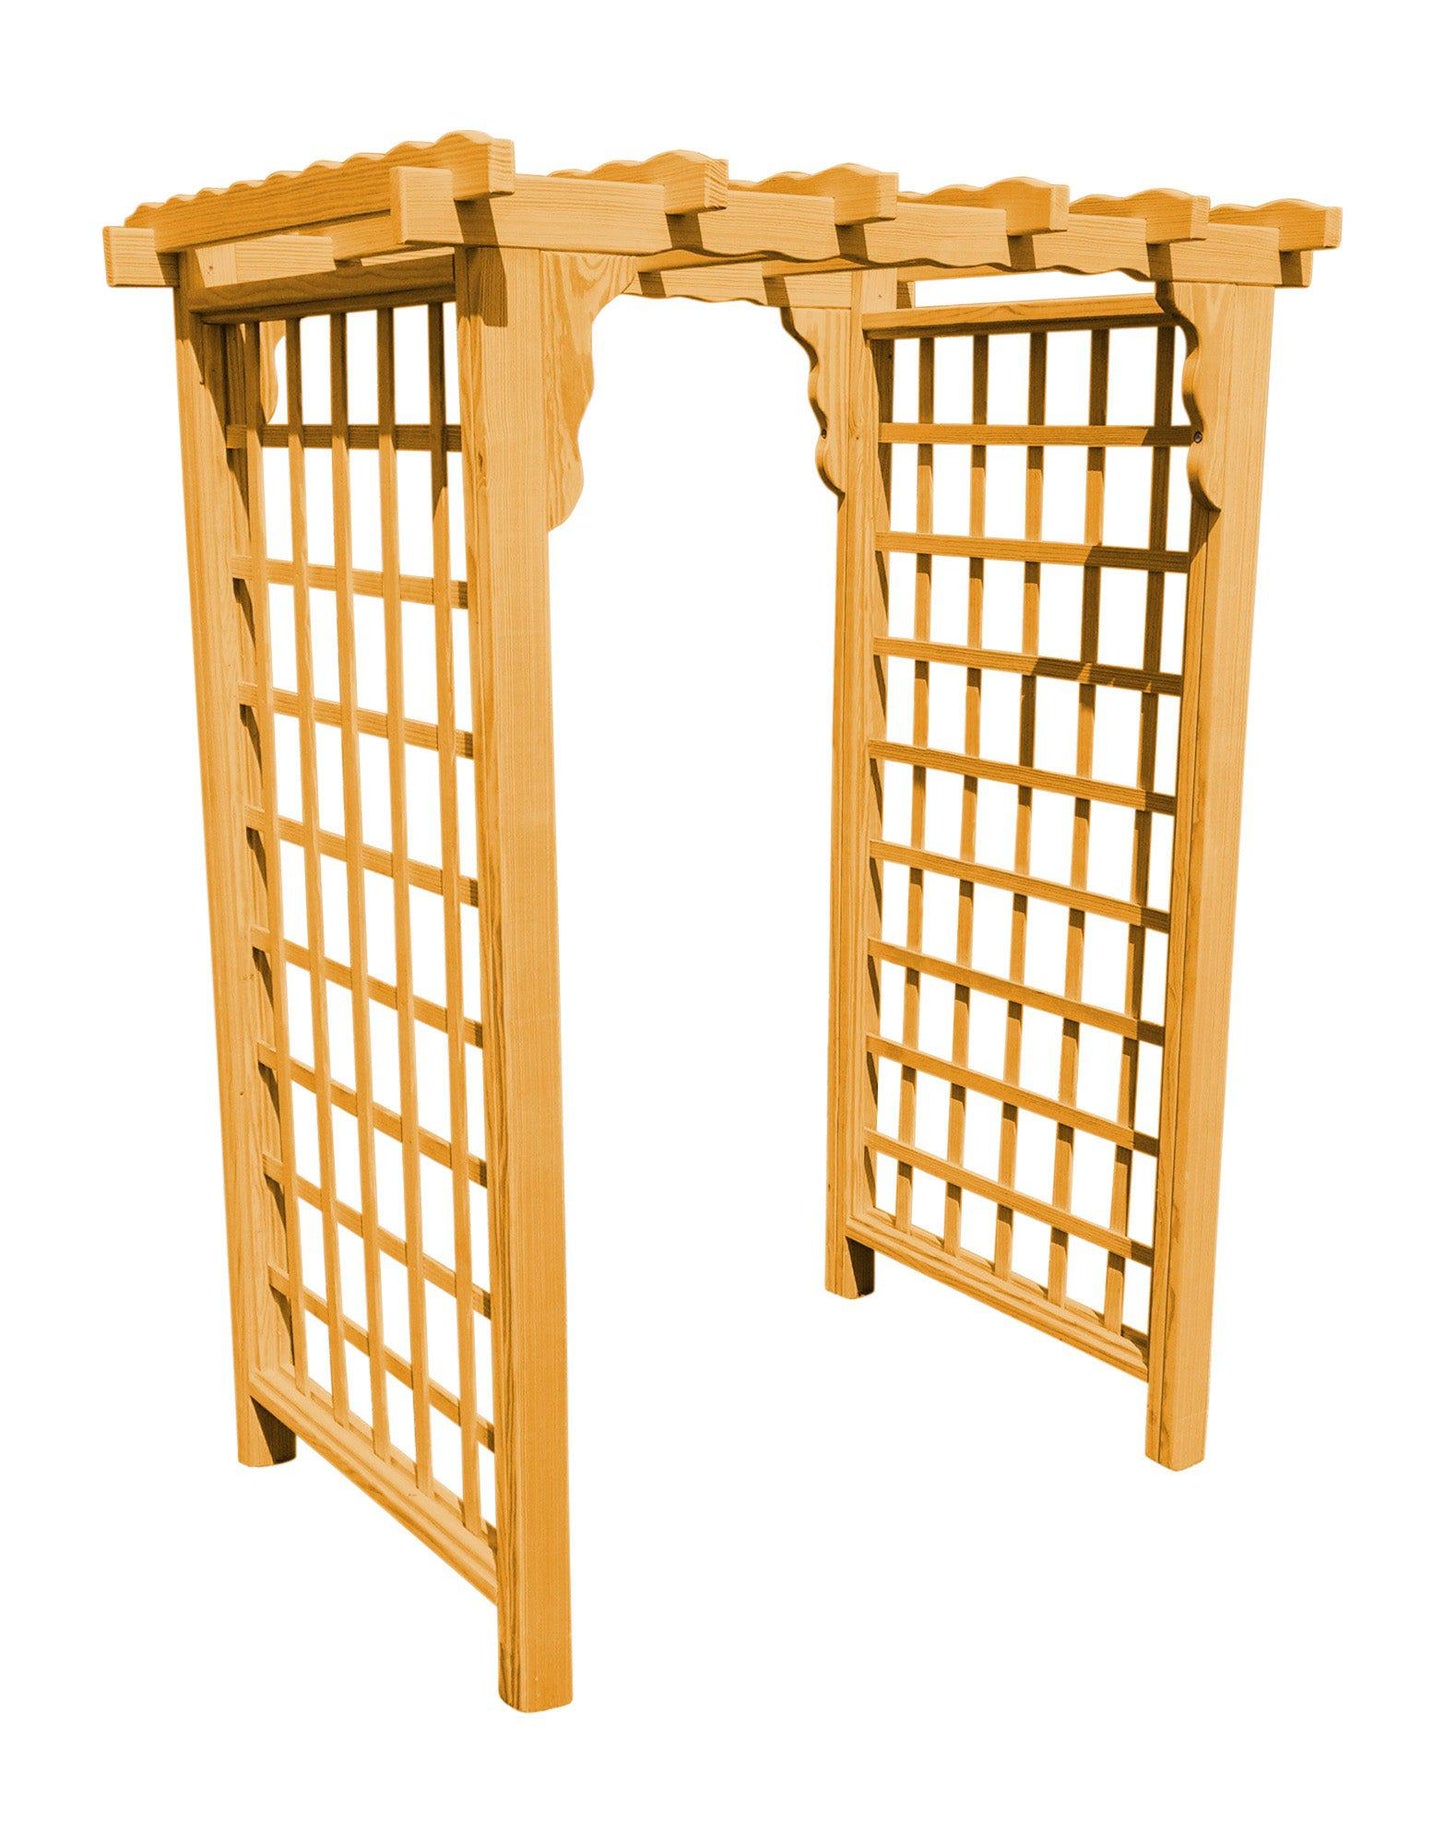 A&L FURNITURE CO. 4' Lexington Pressure Treated Pine Arbor - LEAD TIME TO SHIP 10 BUSINESS DAYS